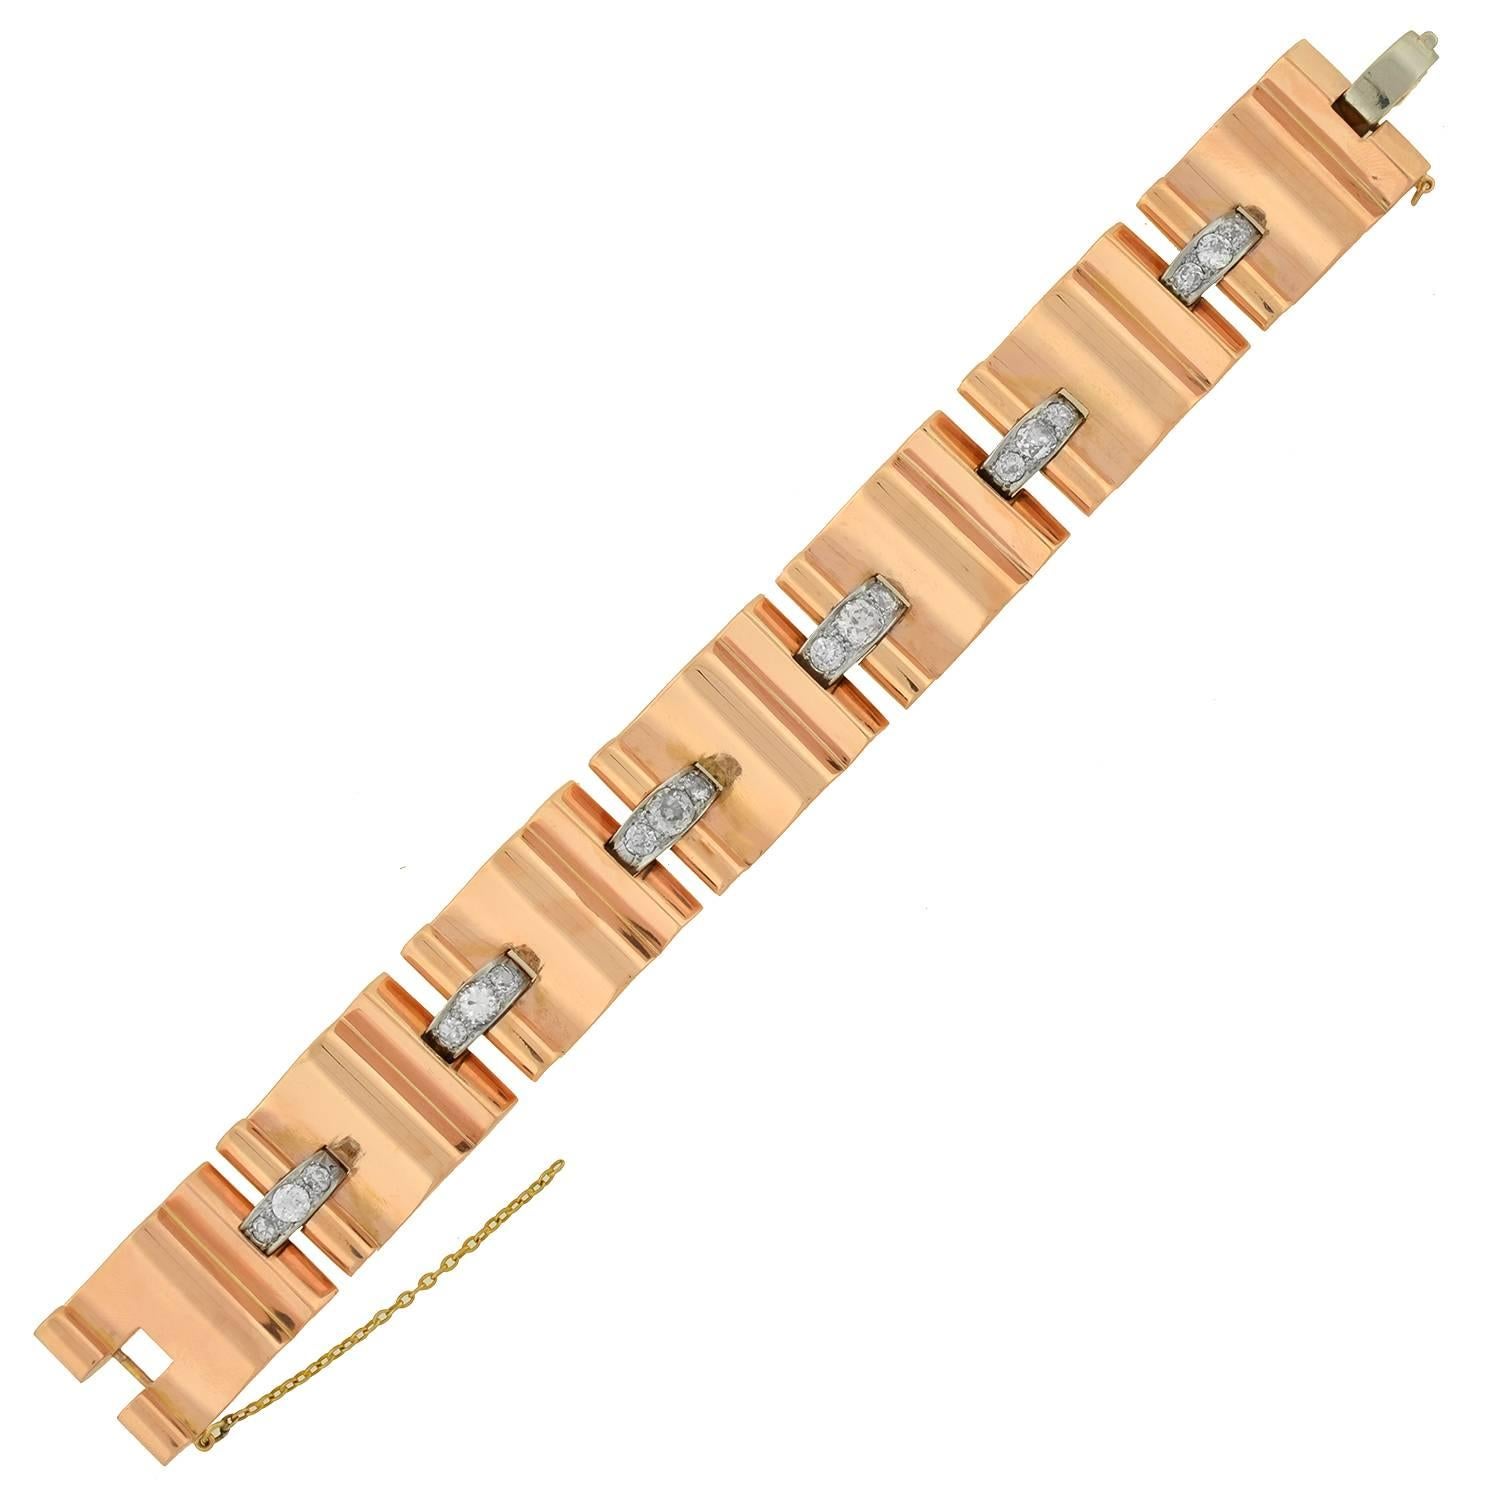 Glamour and luxury jewelry began in Hollywood during the 1940's and 1950's with the be-jeweled glamour gals. This fabulous retro bracelet is a fine example from that era (ca1940). An absolutely stunning piece, the bracelet is made of 14kt rose gold